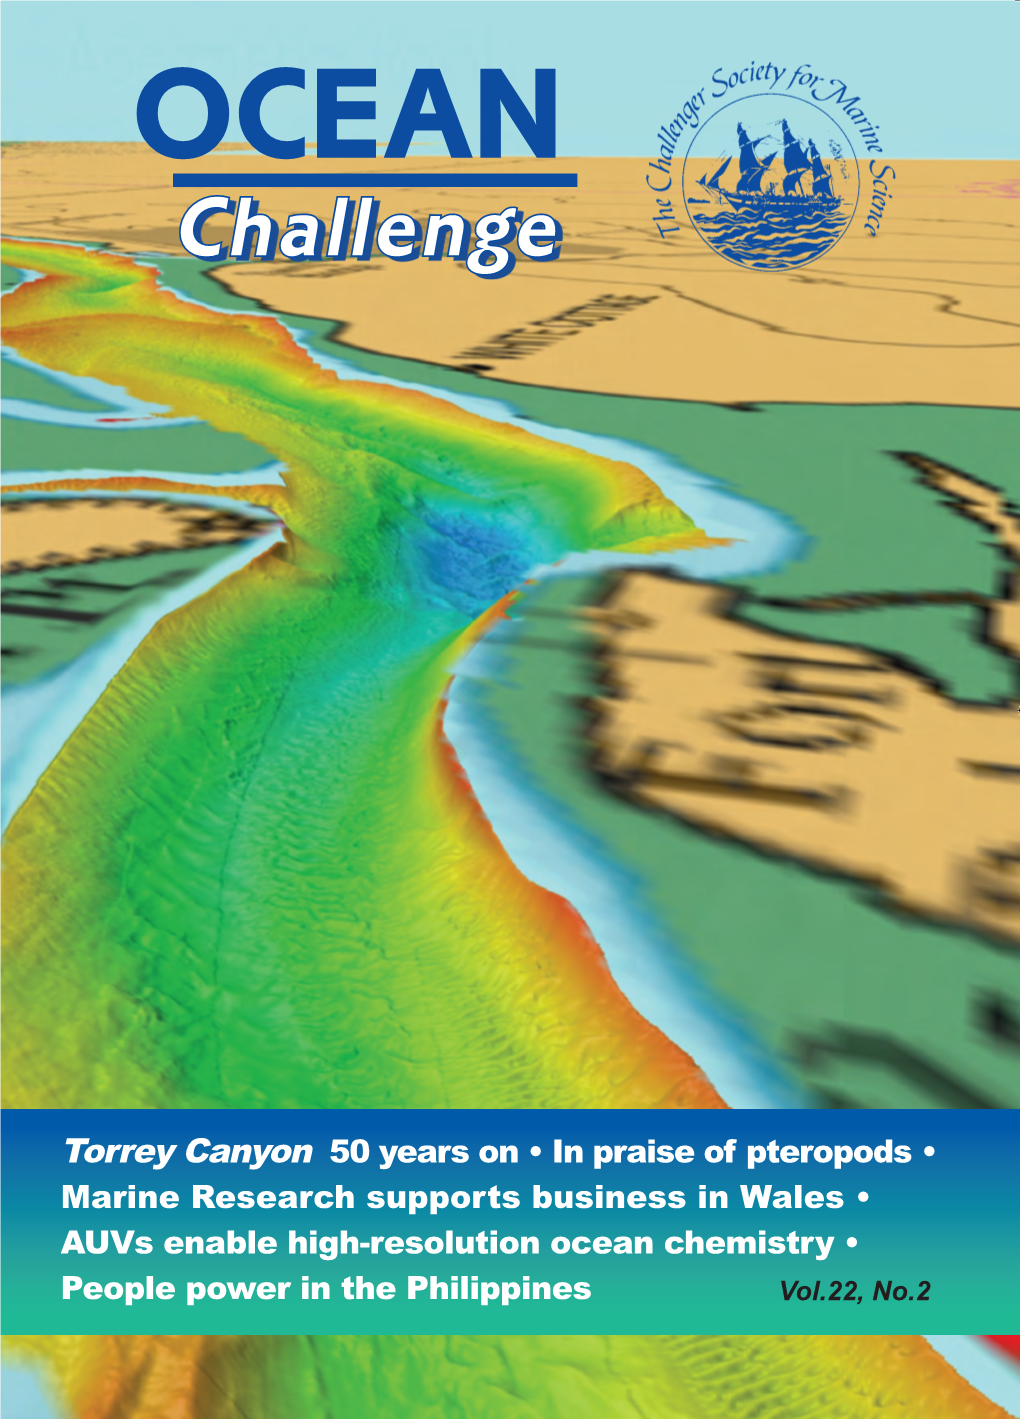 Torrey Canyon 50 Years on • in Praise of Pteropods • Marine Research